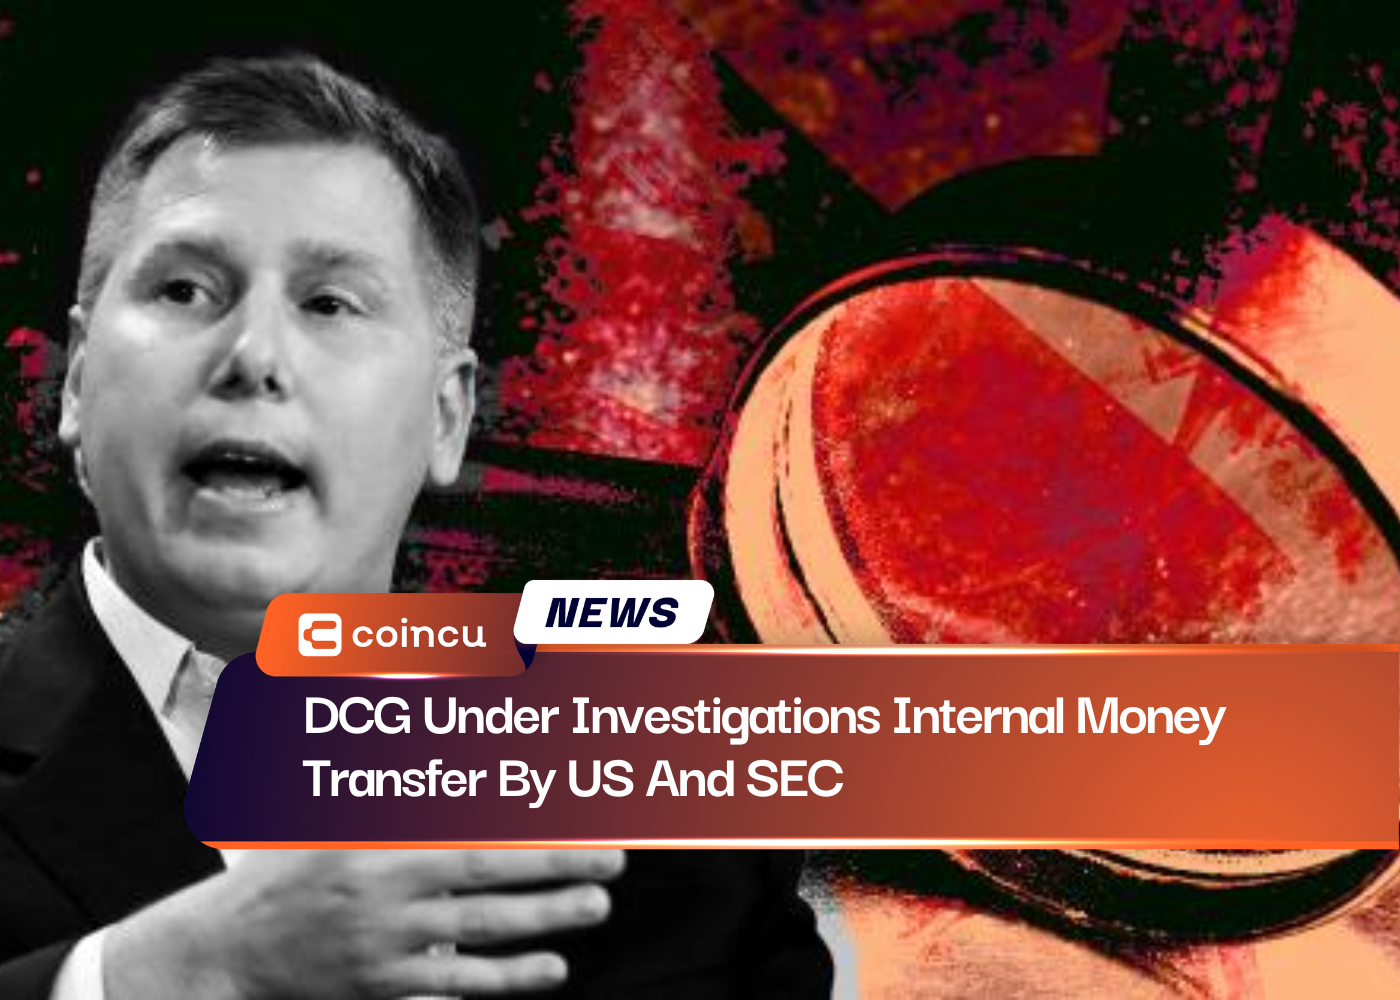 DCG Under Investigations Internal Money Transfer By US And SEC